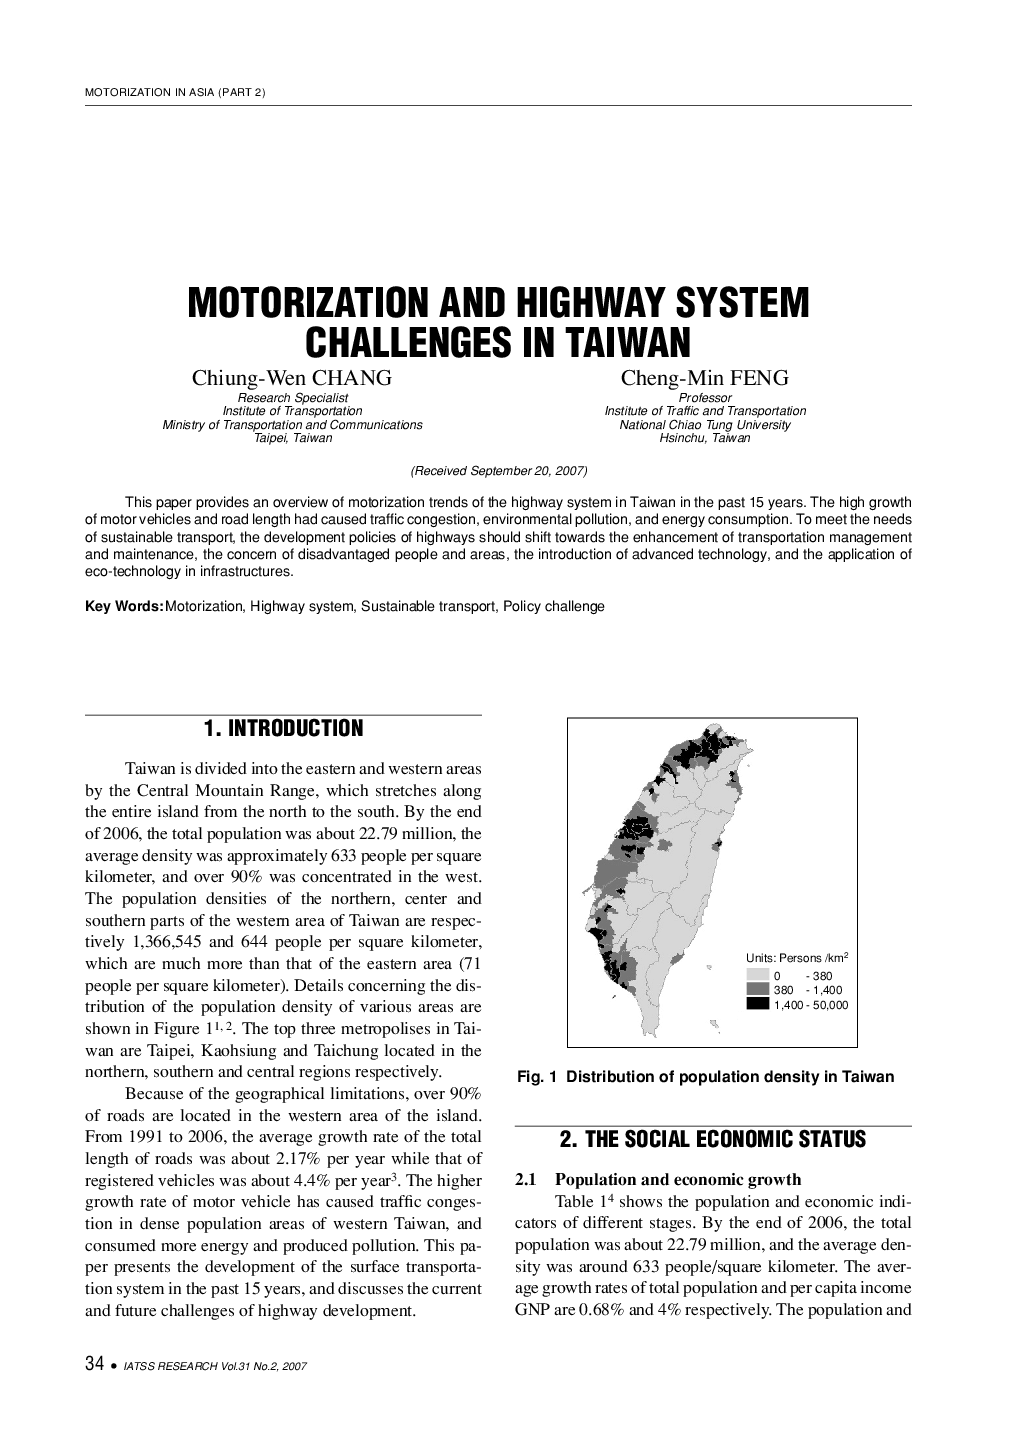 MOTORIZATION AND HIGHWAY SYSTEM CHALLENGES IN TAIWAN